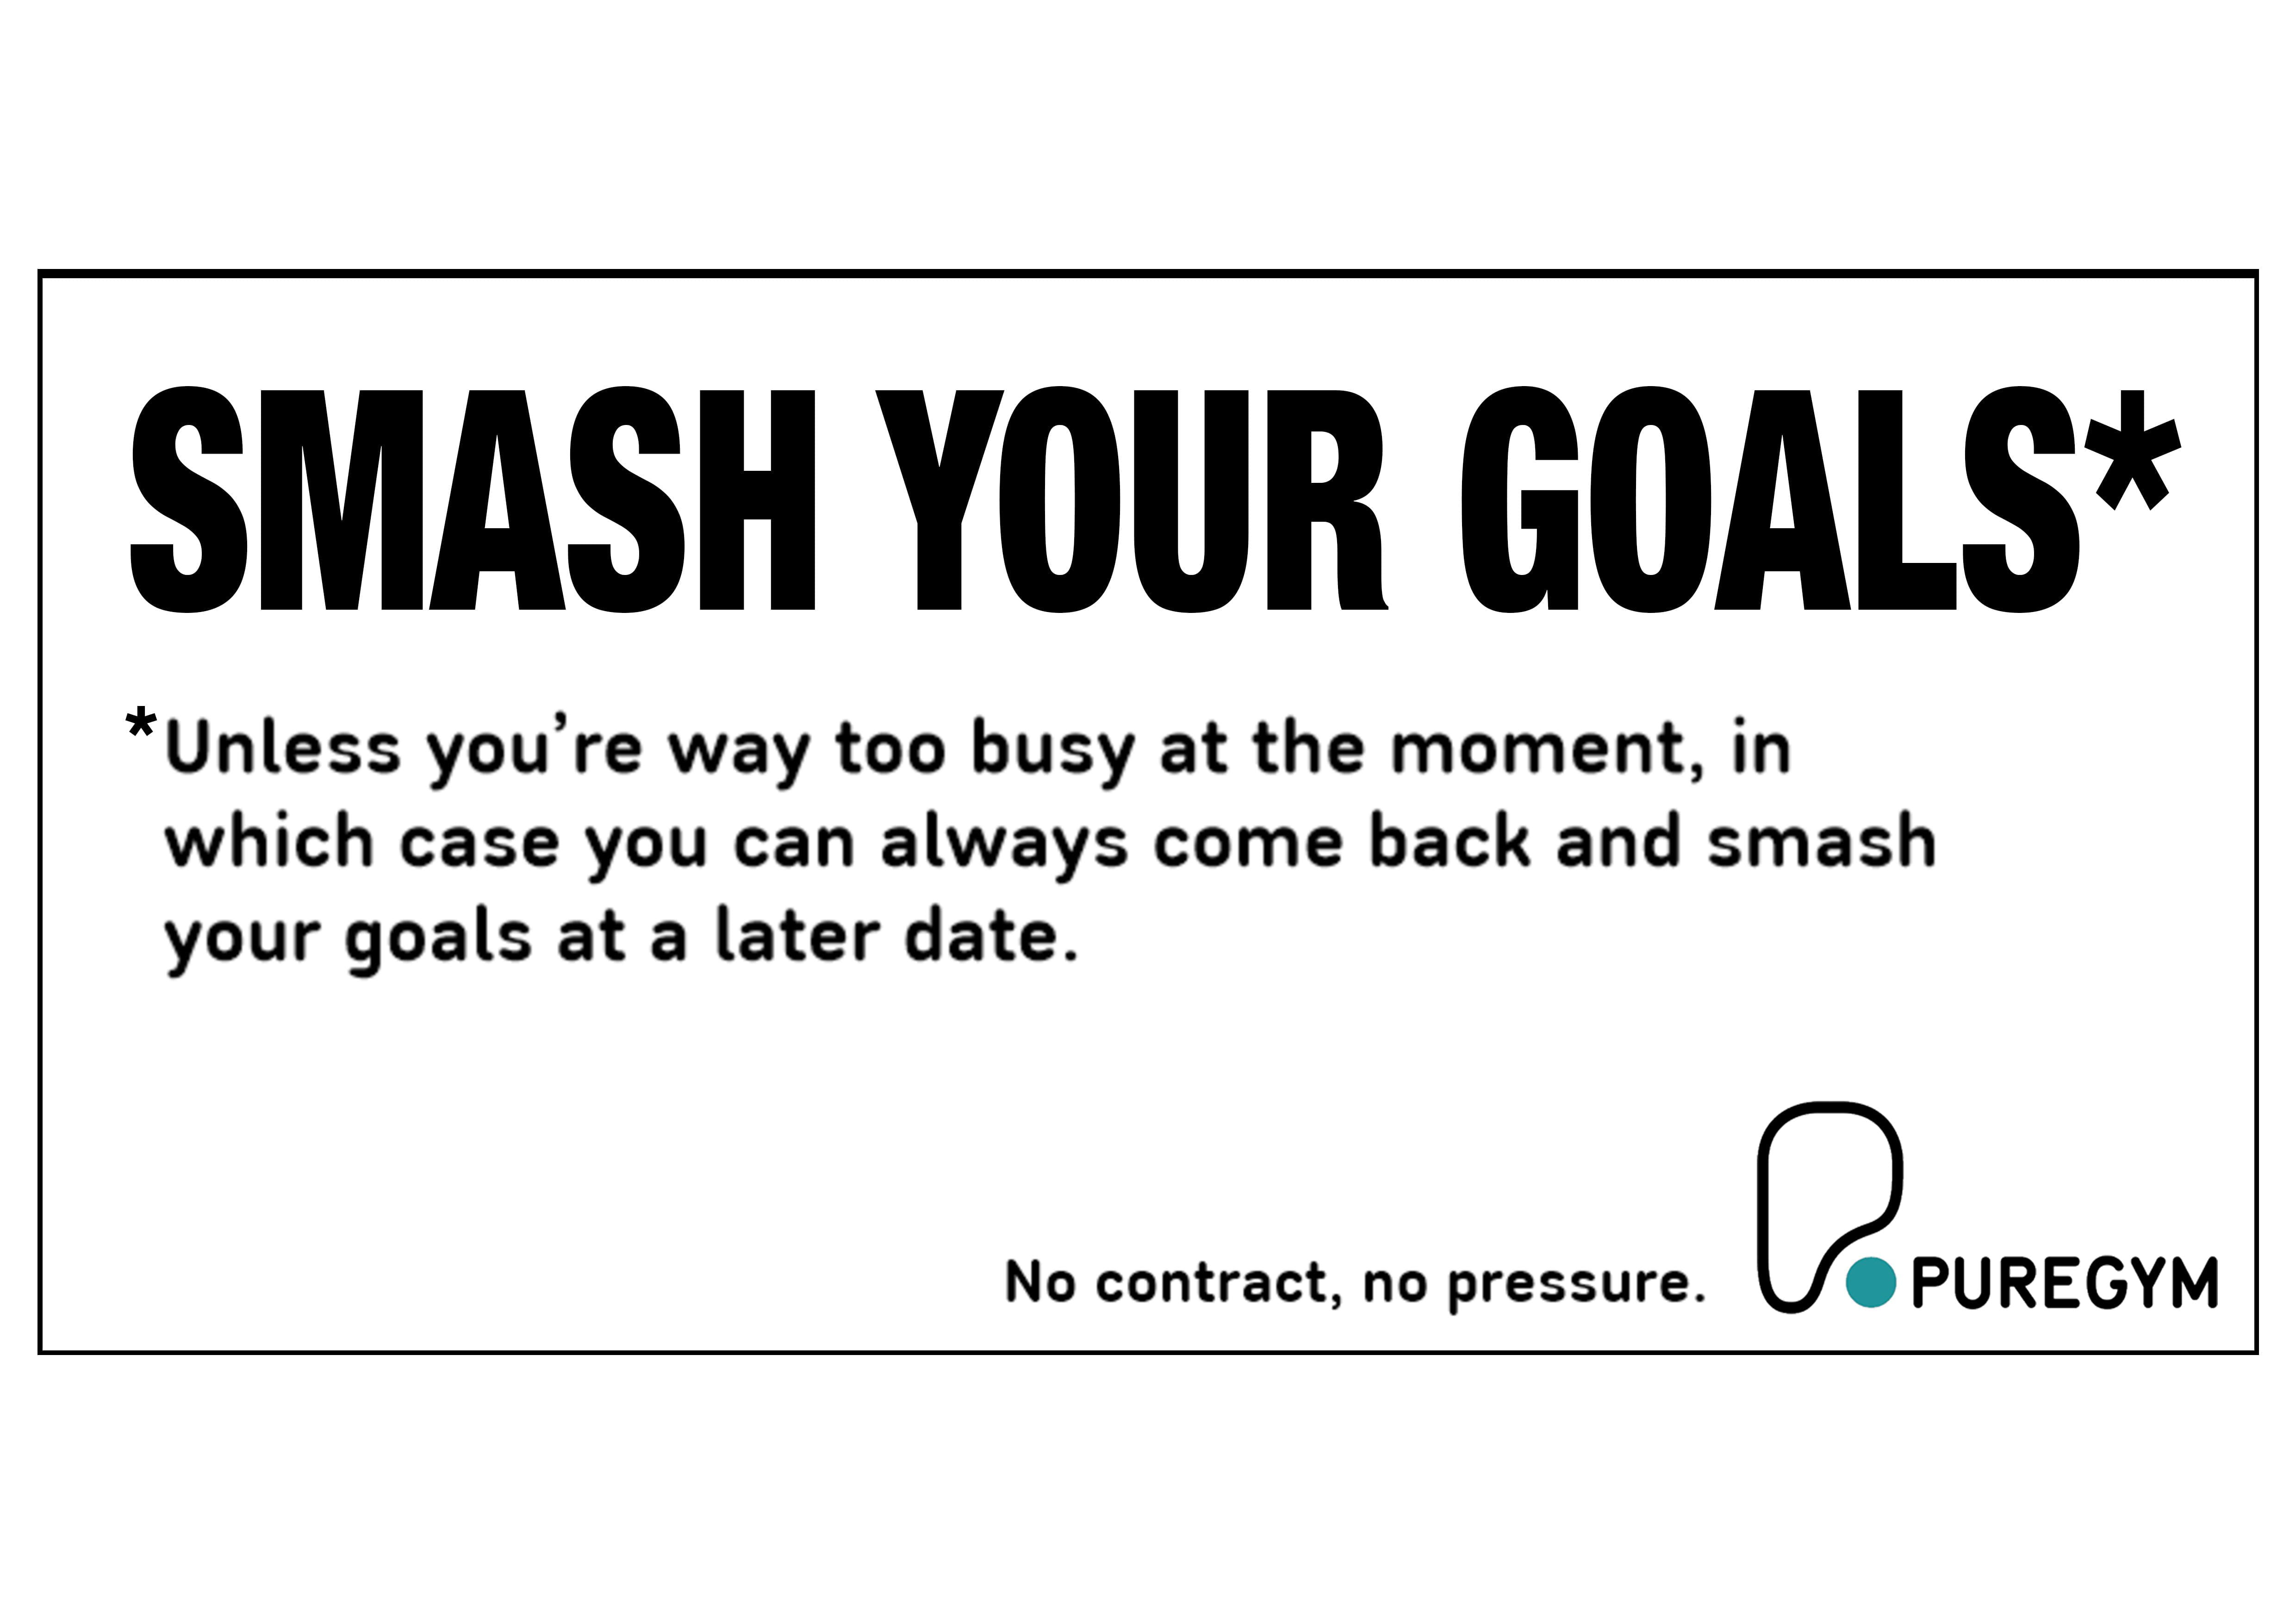 PureGym Billboard ad that reads: Smash your goals